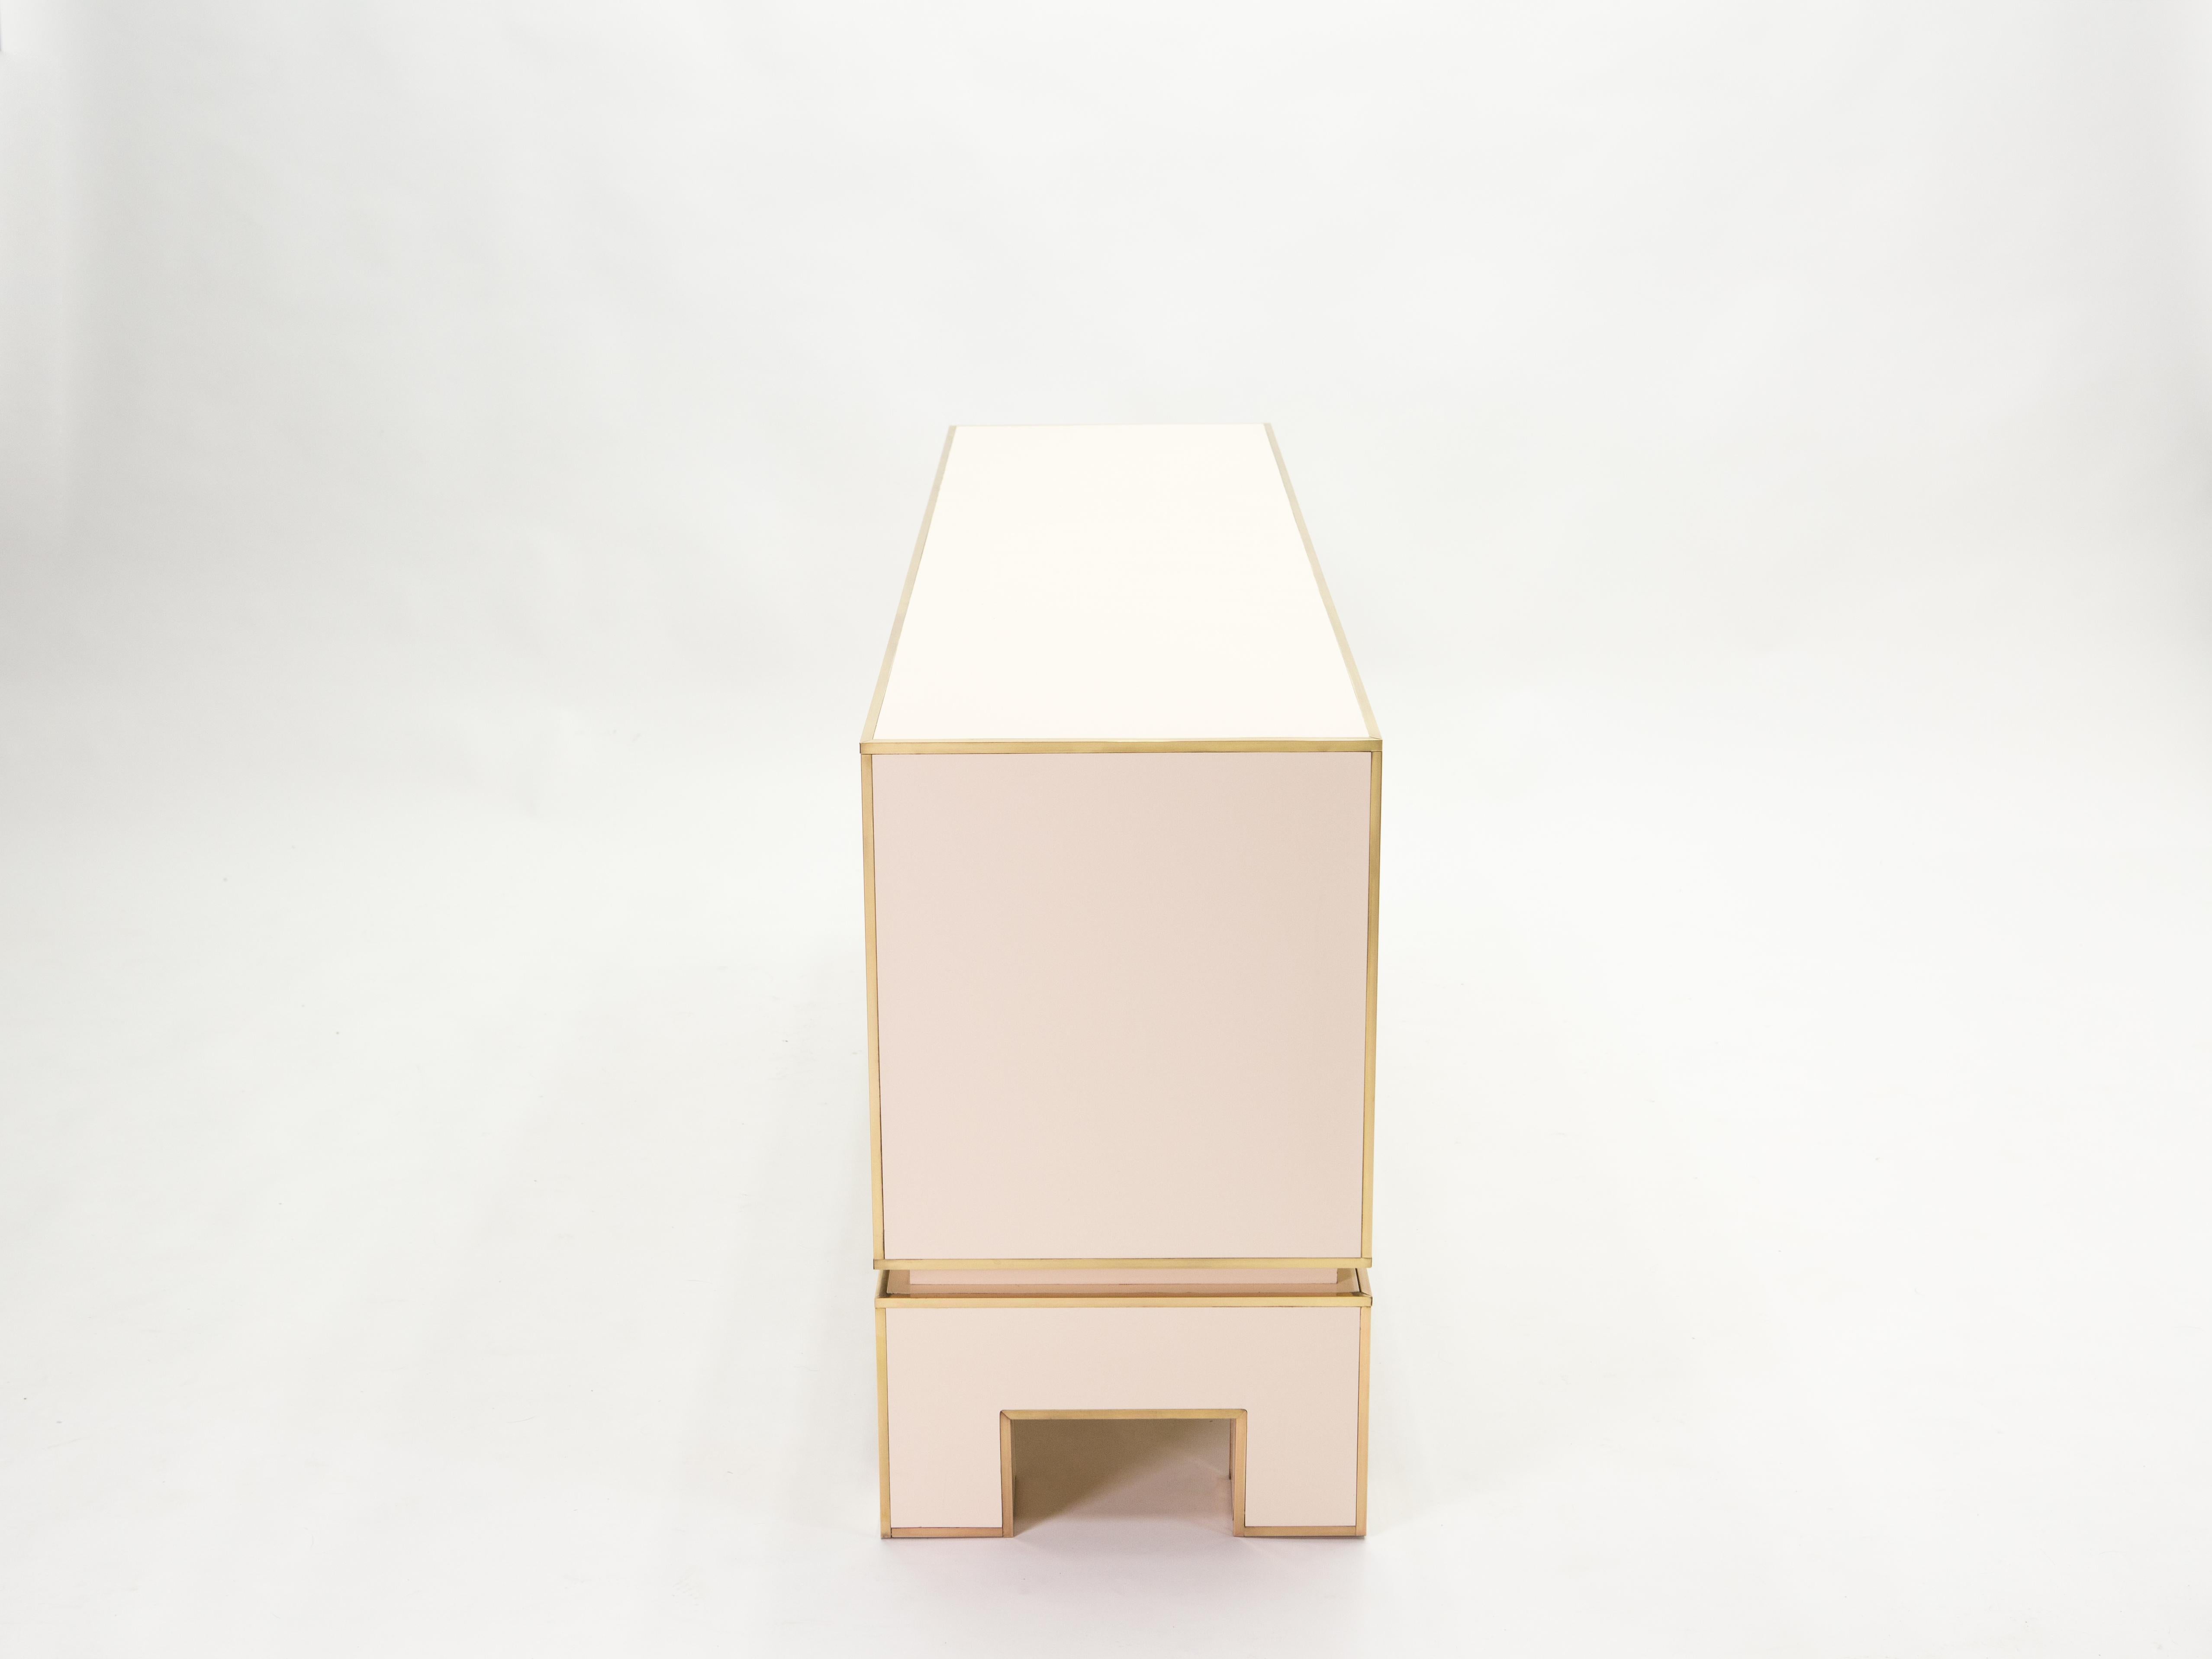 Late 20th Century Sideboard Commode Brass White Lacquer by Alain Delon for Maison Jansen, 1975